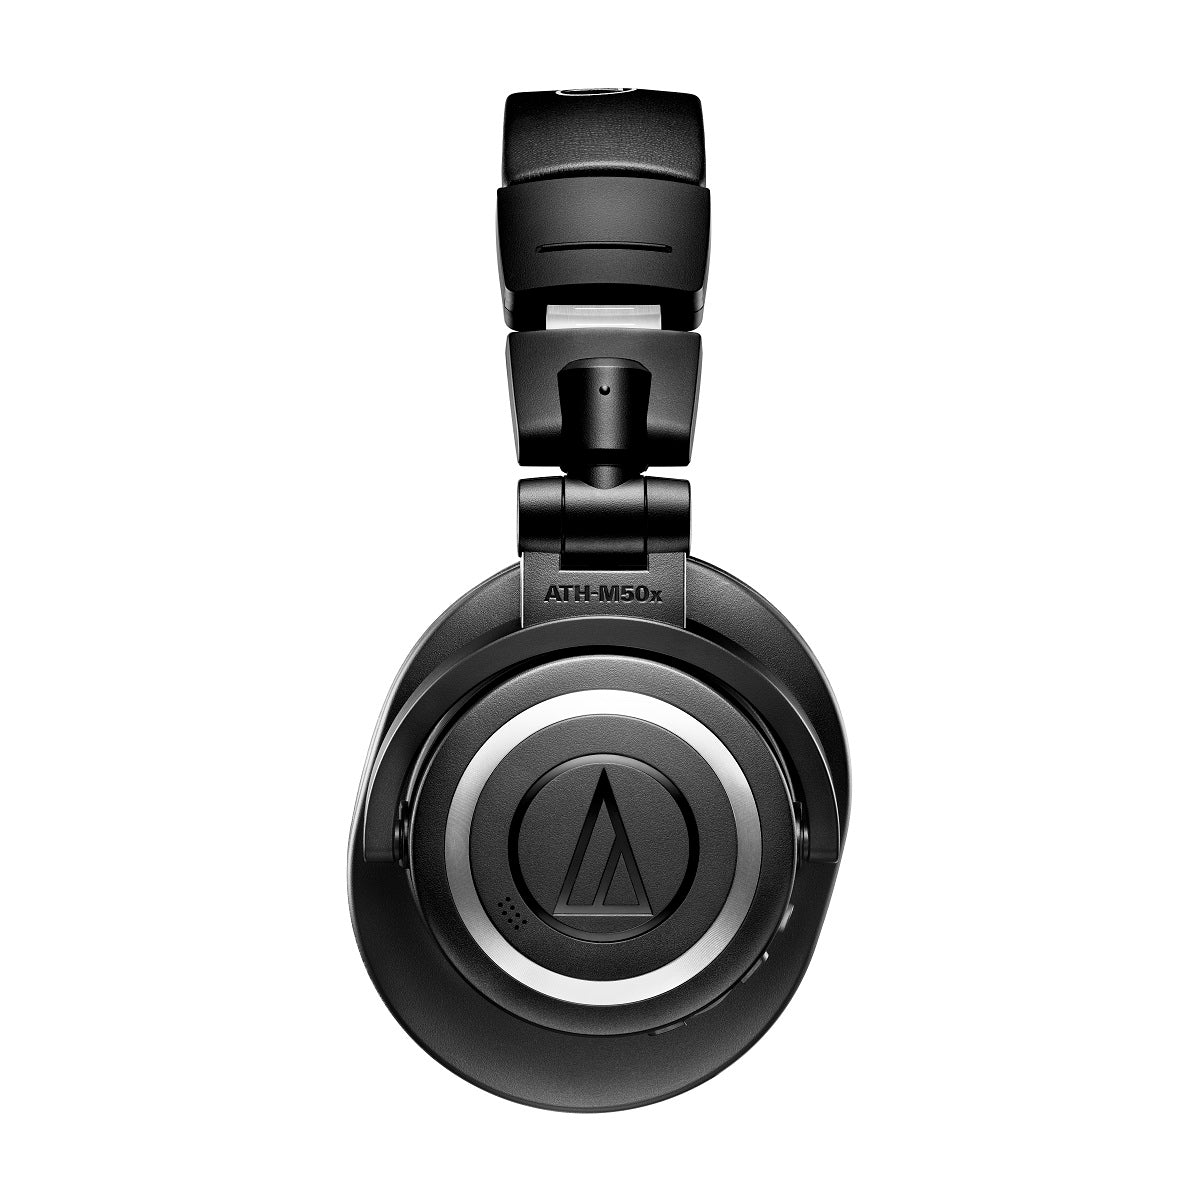 Audio-Technica ATH-M50xBT2 Wireless Over-Ear Headphones with Bluetooth (Black)